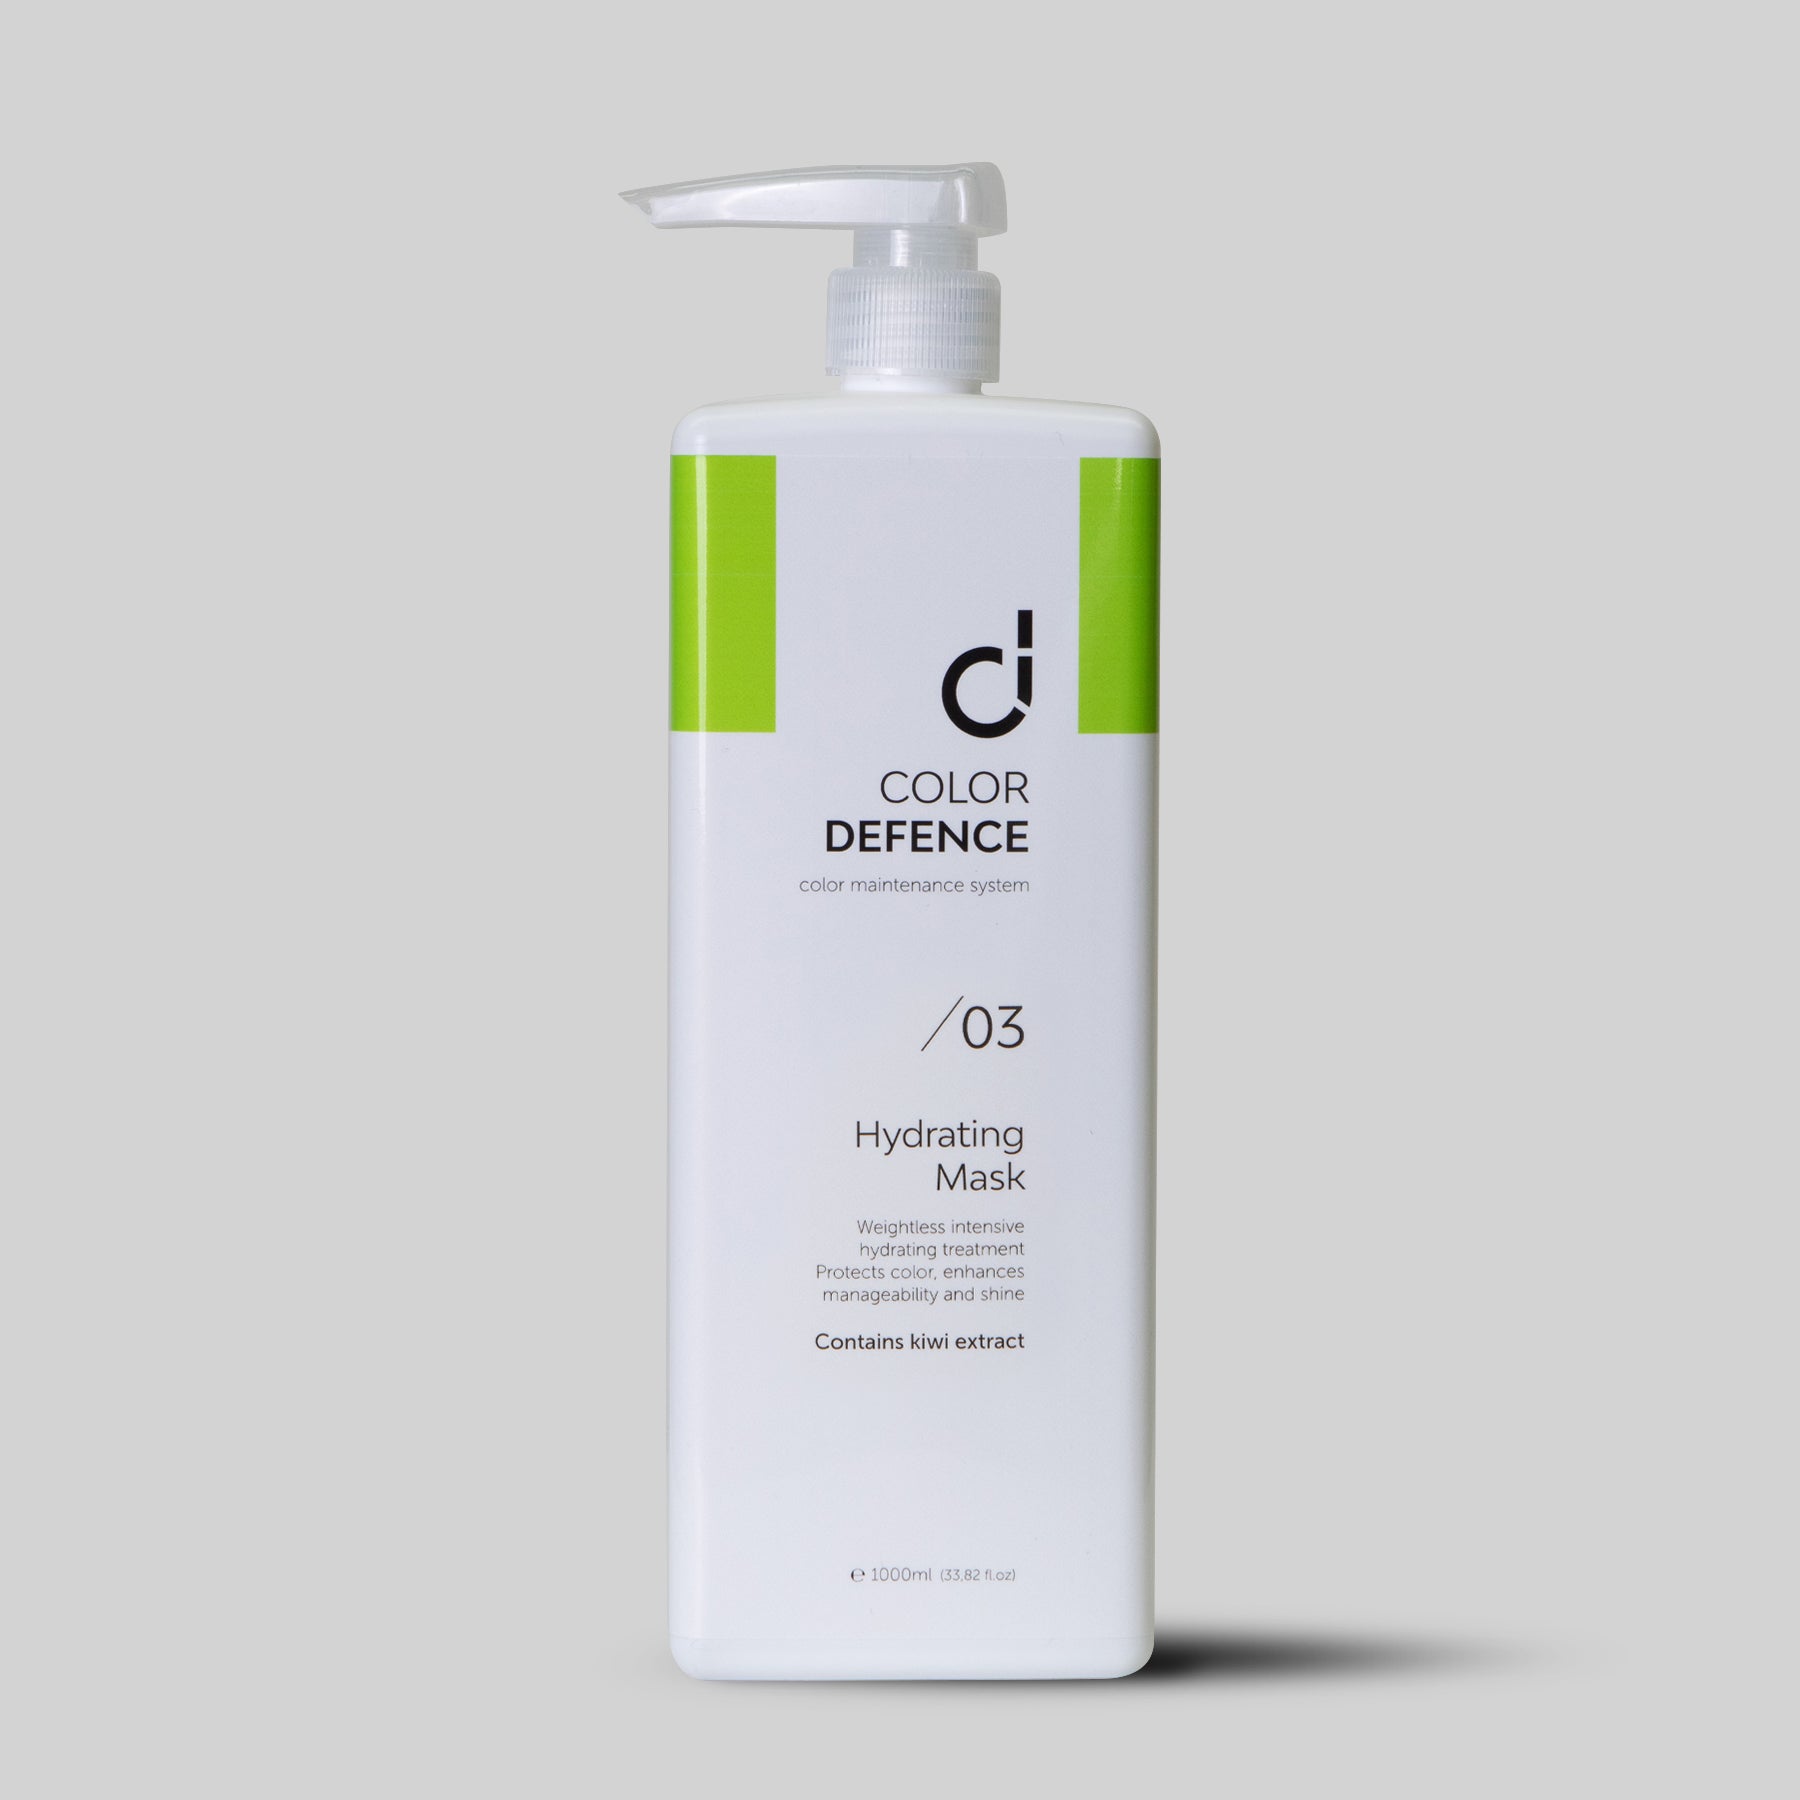 Intense weightless hydrating treatment locks in colour. The 3-defence complex system™ reduces oxidation, protects against free radical & environmental damage. Contains kiwi extract & vitamin E. Protects colour, enhances manageability, replenish moisture & shine. Suitable for coloured & damaged hair. Can be used daily.1234